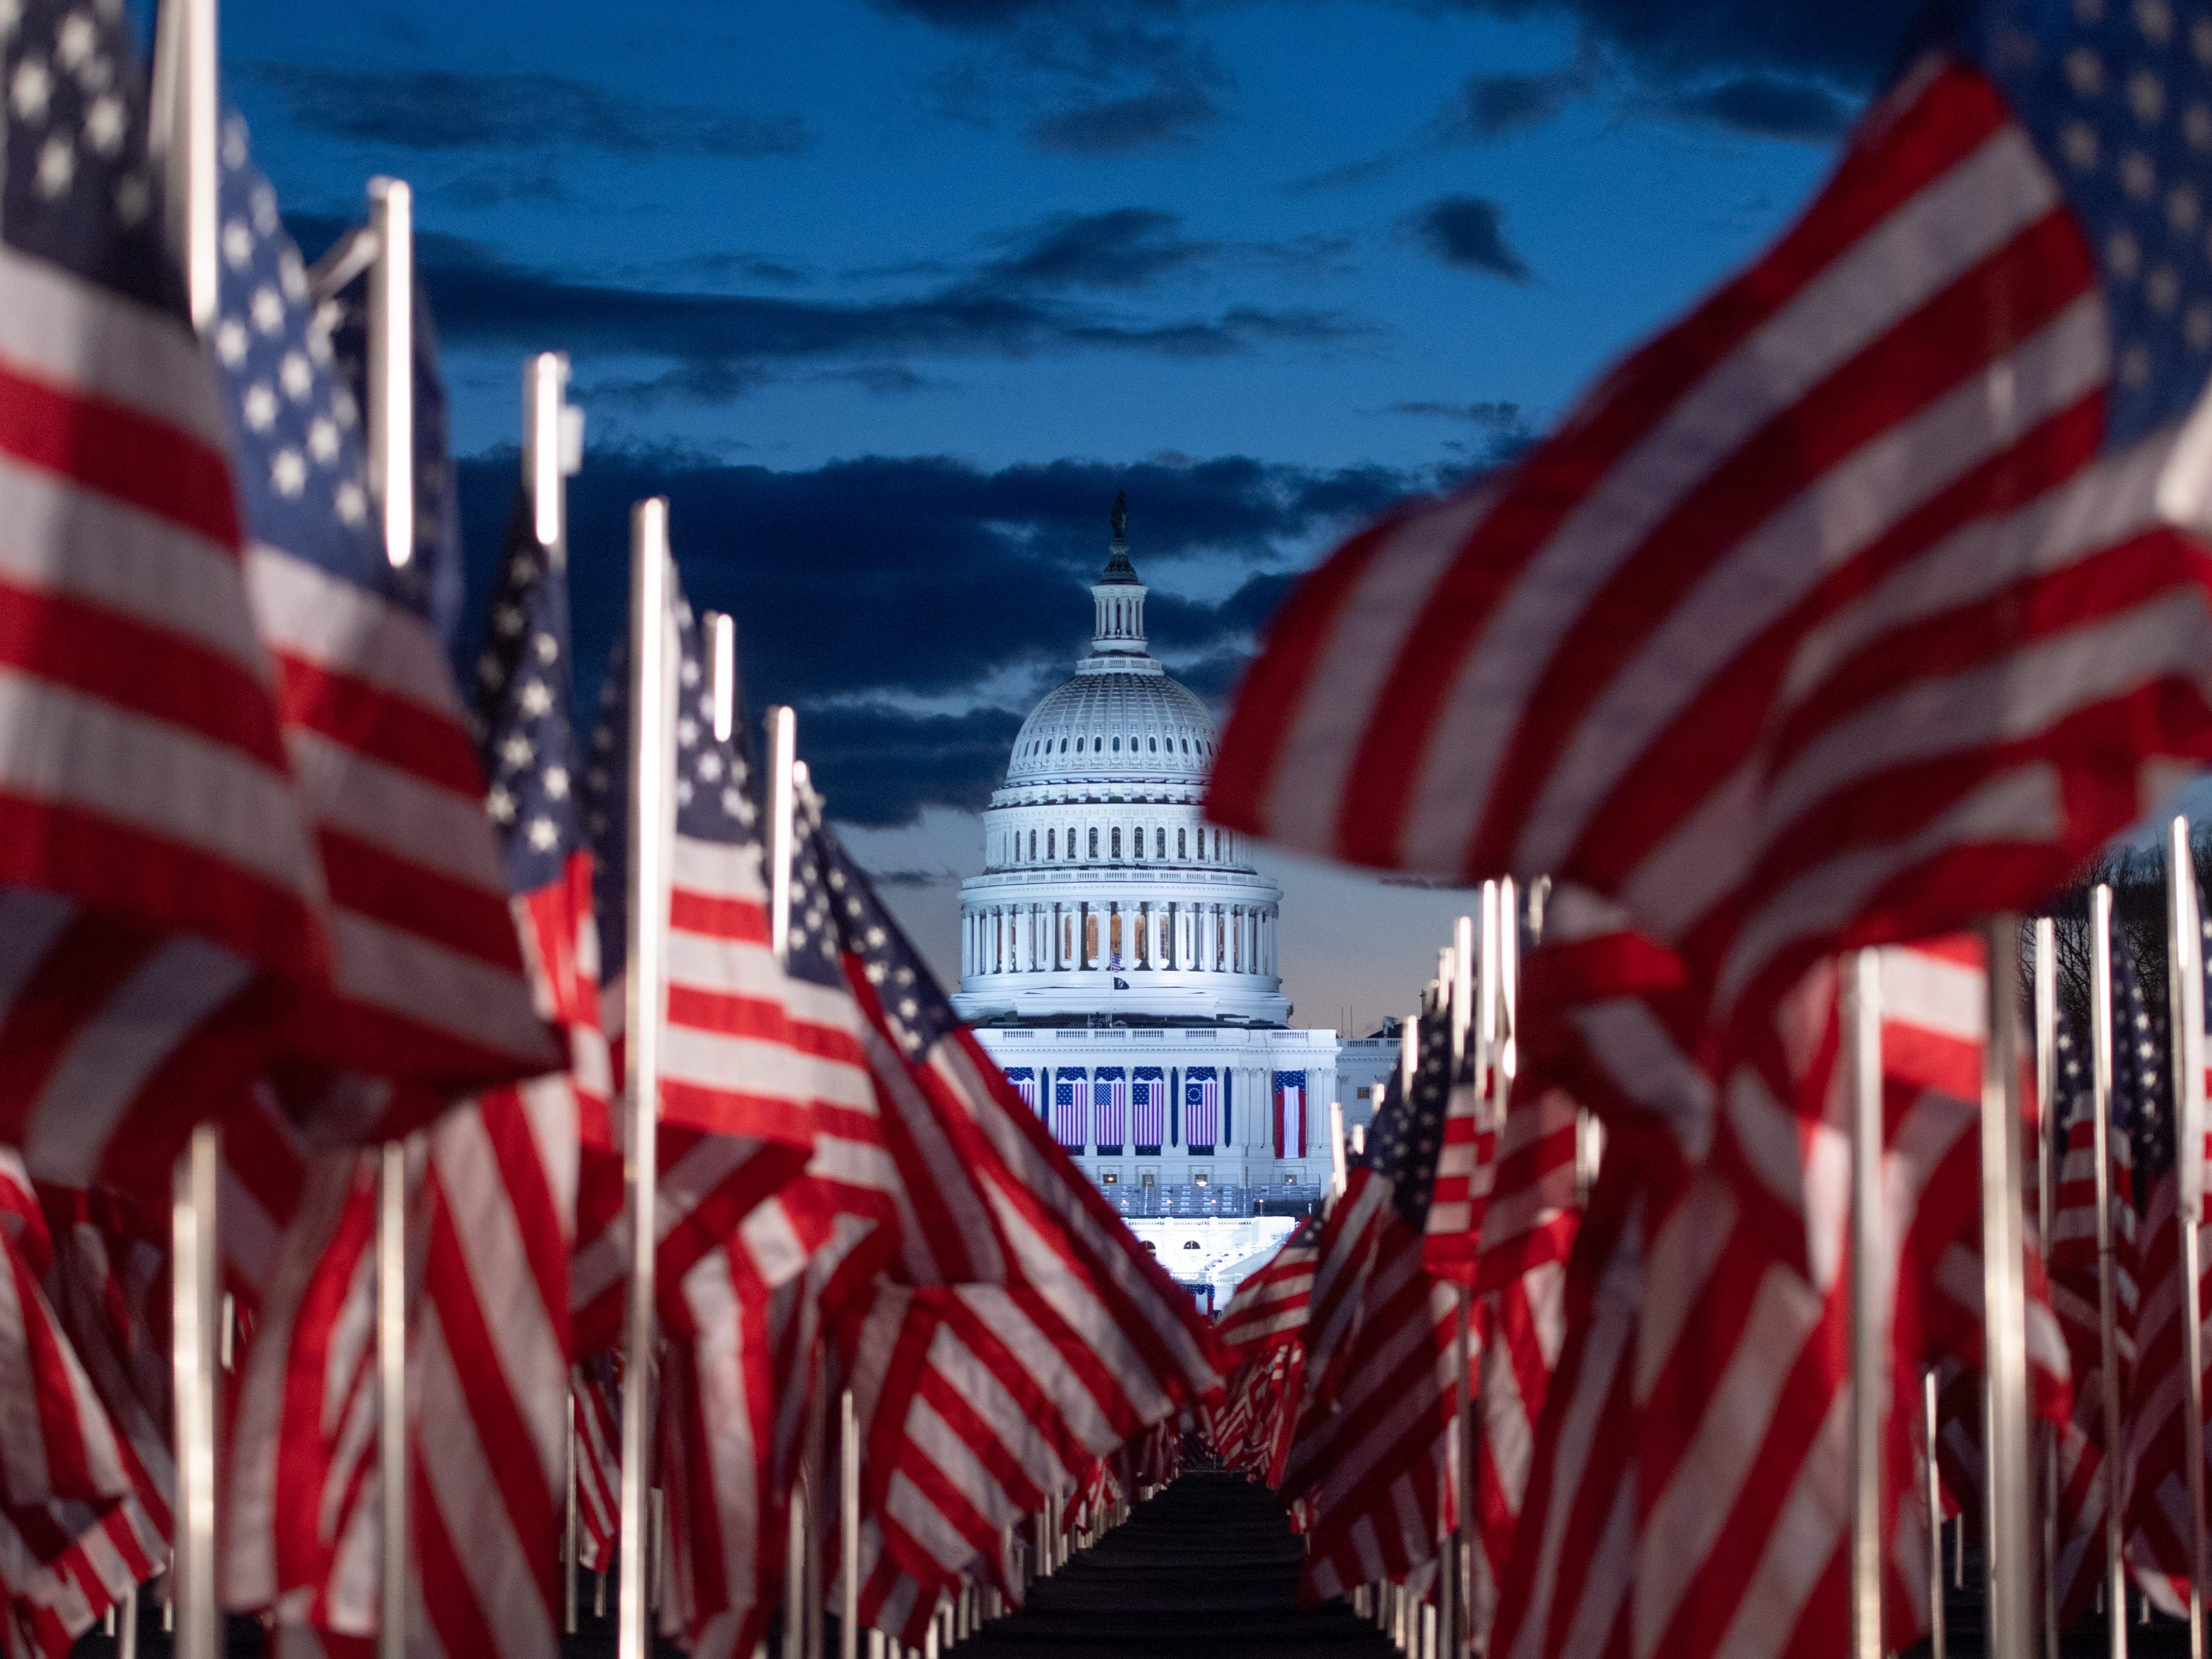 Nearly 200,000 American flags are seen in the early hours of Inauguration Day on the National Mall as part of a ‘Field of Flags’ exhibition to represent those not able to attend due to the Covid-19 pandemic